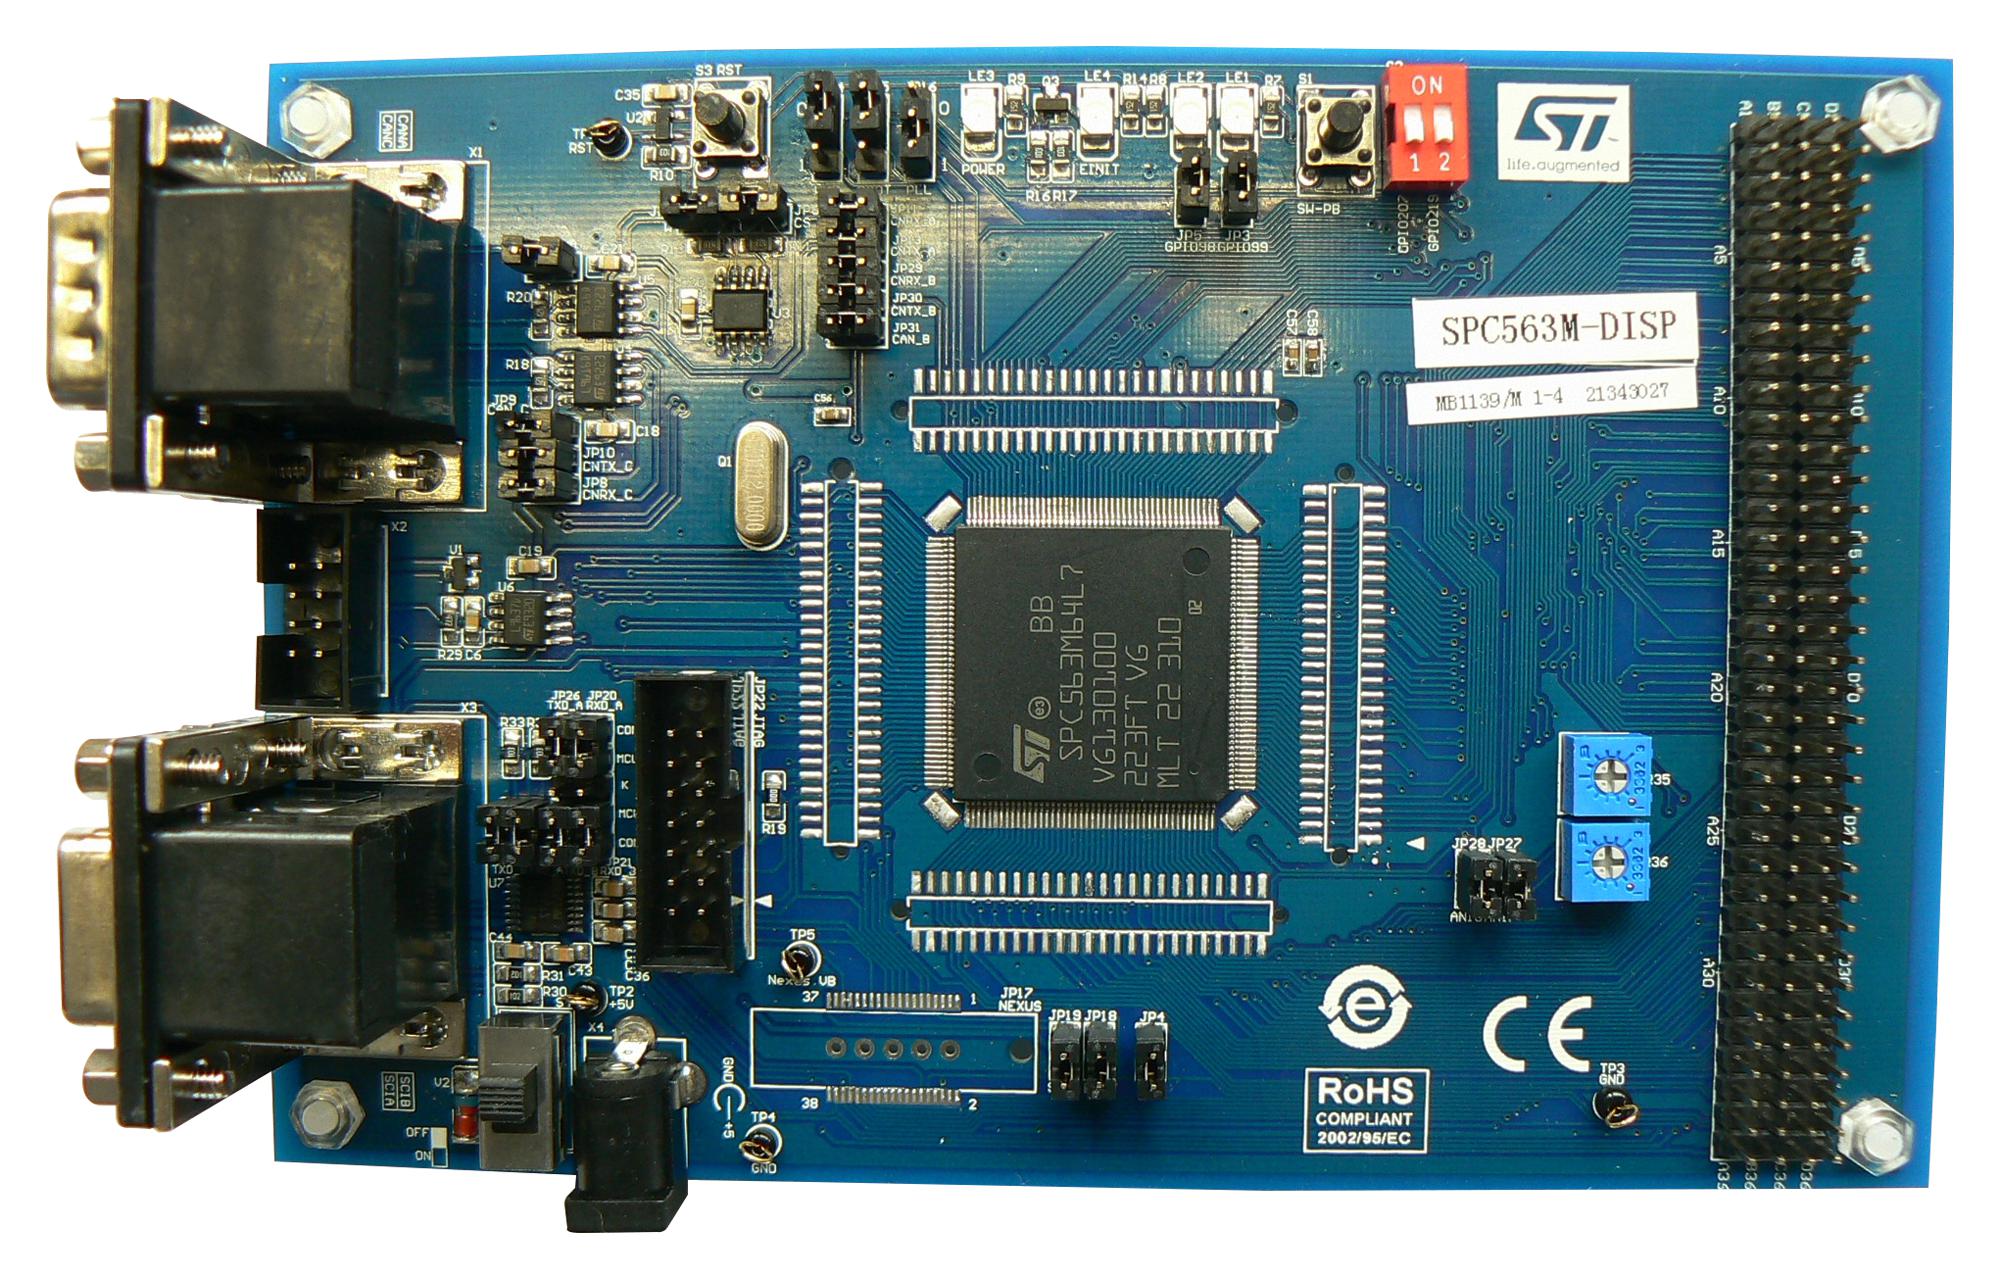 SPC564A-DISP EVALUATION BOARD, DISCOVERY PLUS STMICROELECTRONICS